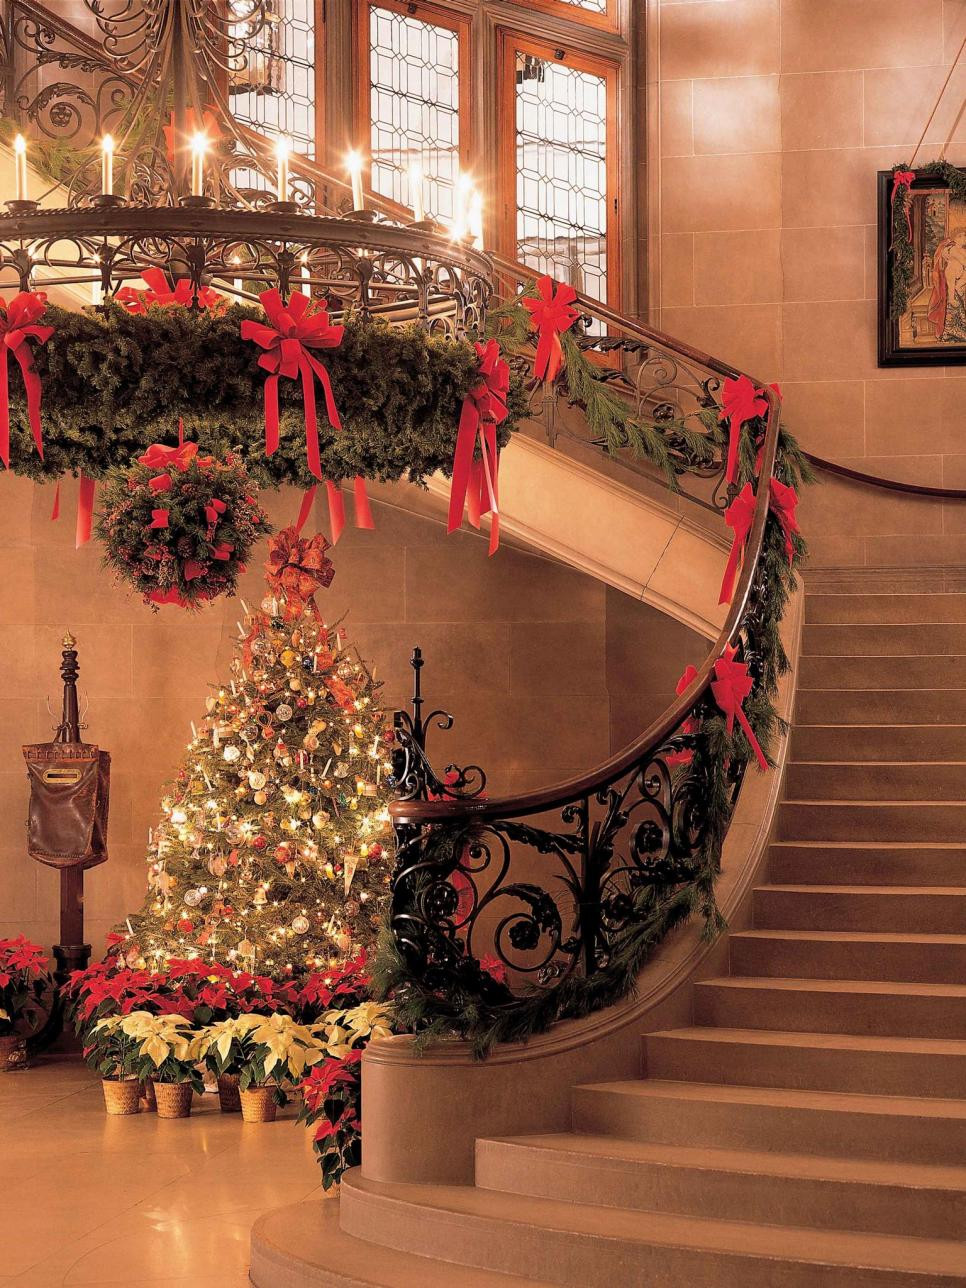 CHRISTMAS CENTER STAIRCASE WITH DECORATED BANISTER BY PETER ATKINS